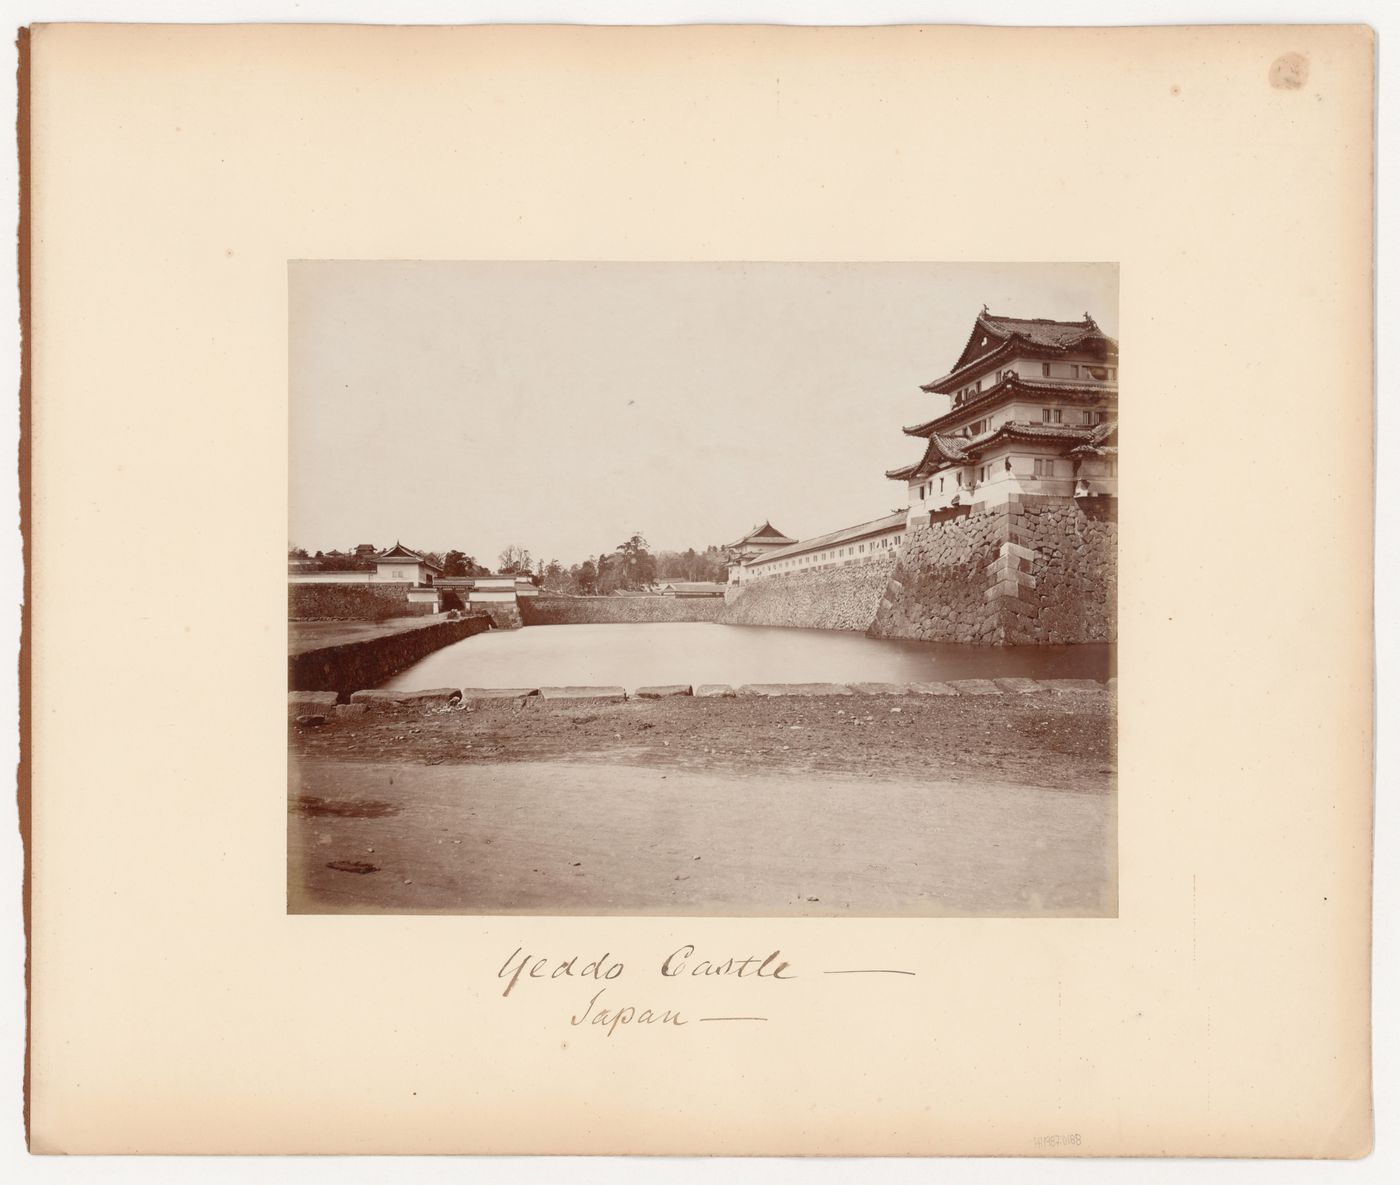 Partial view of Edojo [Edo Castle] showing watchtowers, a moat and defensive walls, Edo (now Tokyo), Japan